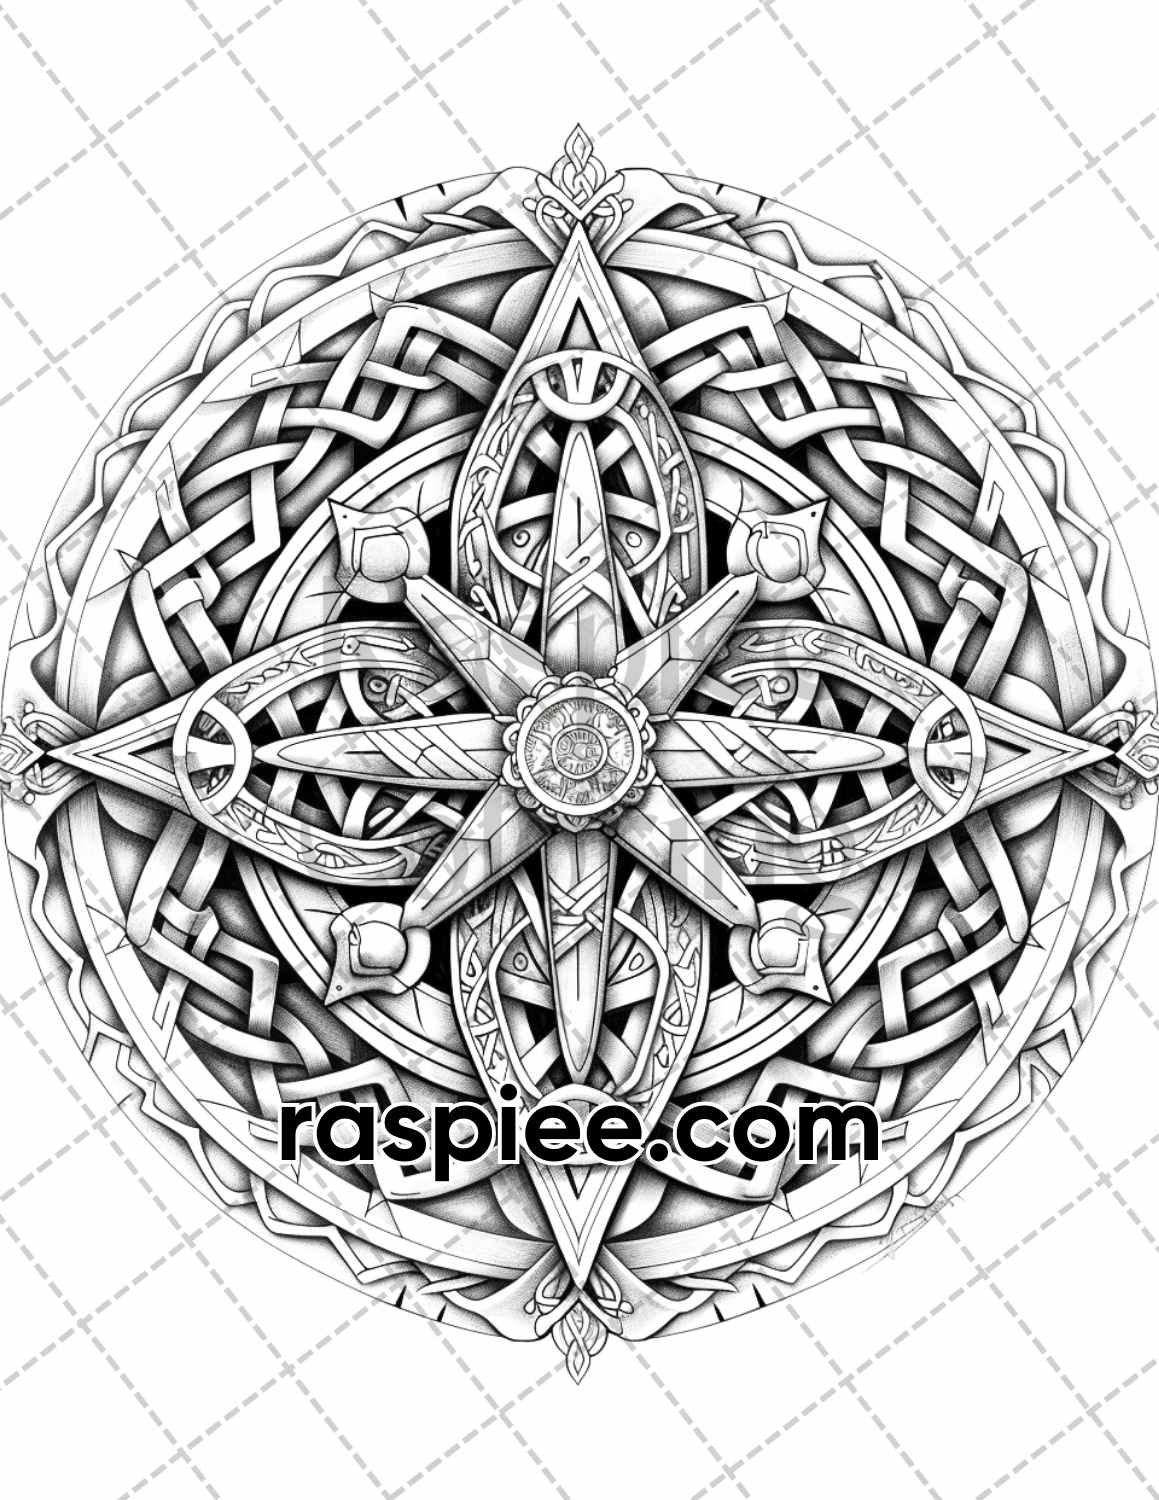 adult coloring pages, adult coloring sheets, adult coloring book pdf, adult coloring book printable, grayscale coloring pages, grayscale coloring books, grayscale illustration, viking tattoos adult coloring pages, viking tattoos coloring book